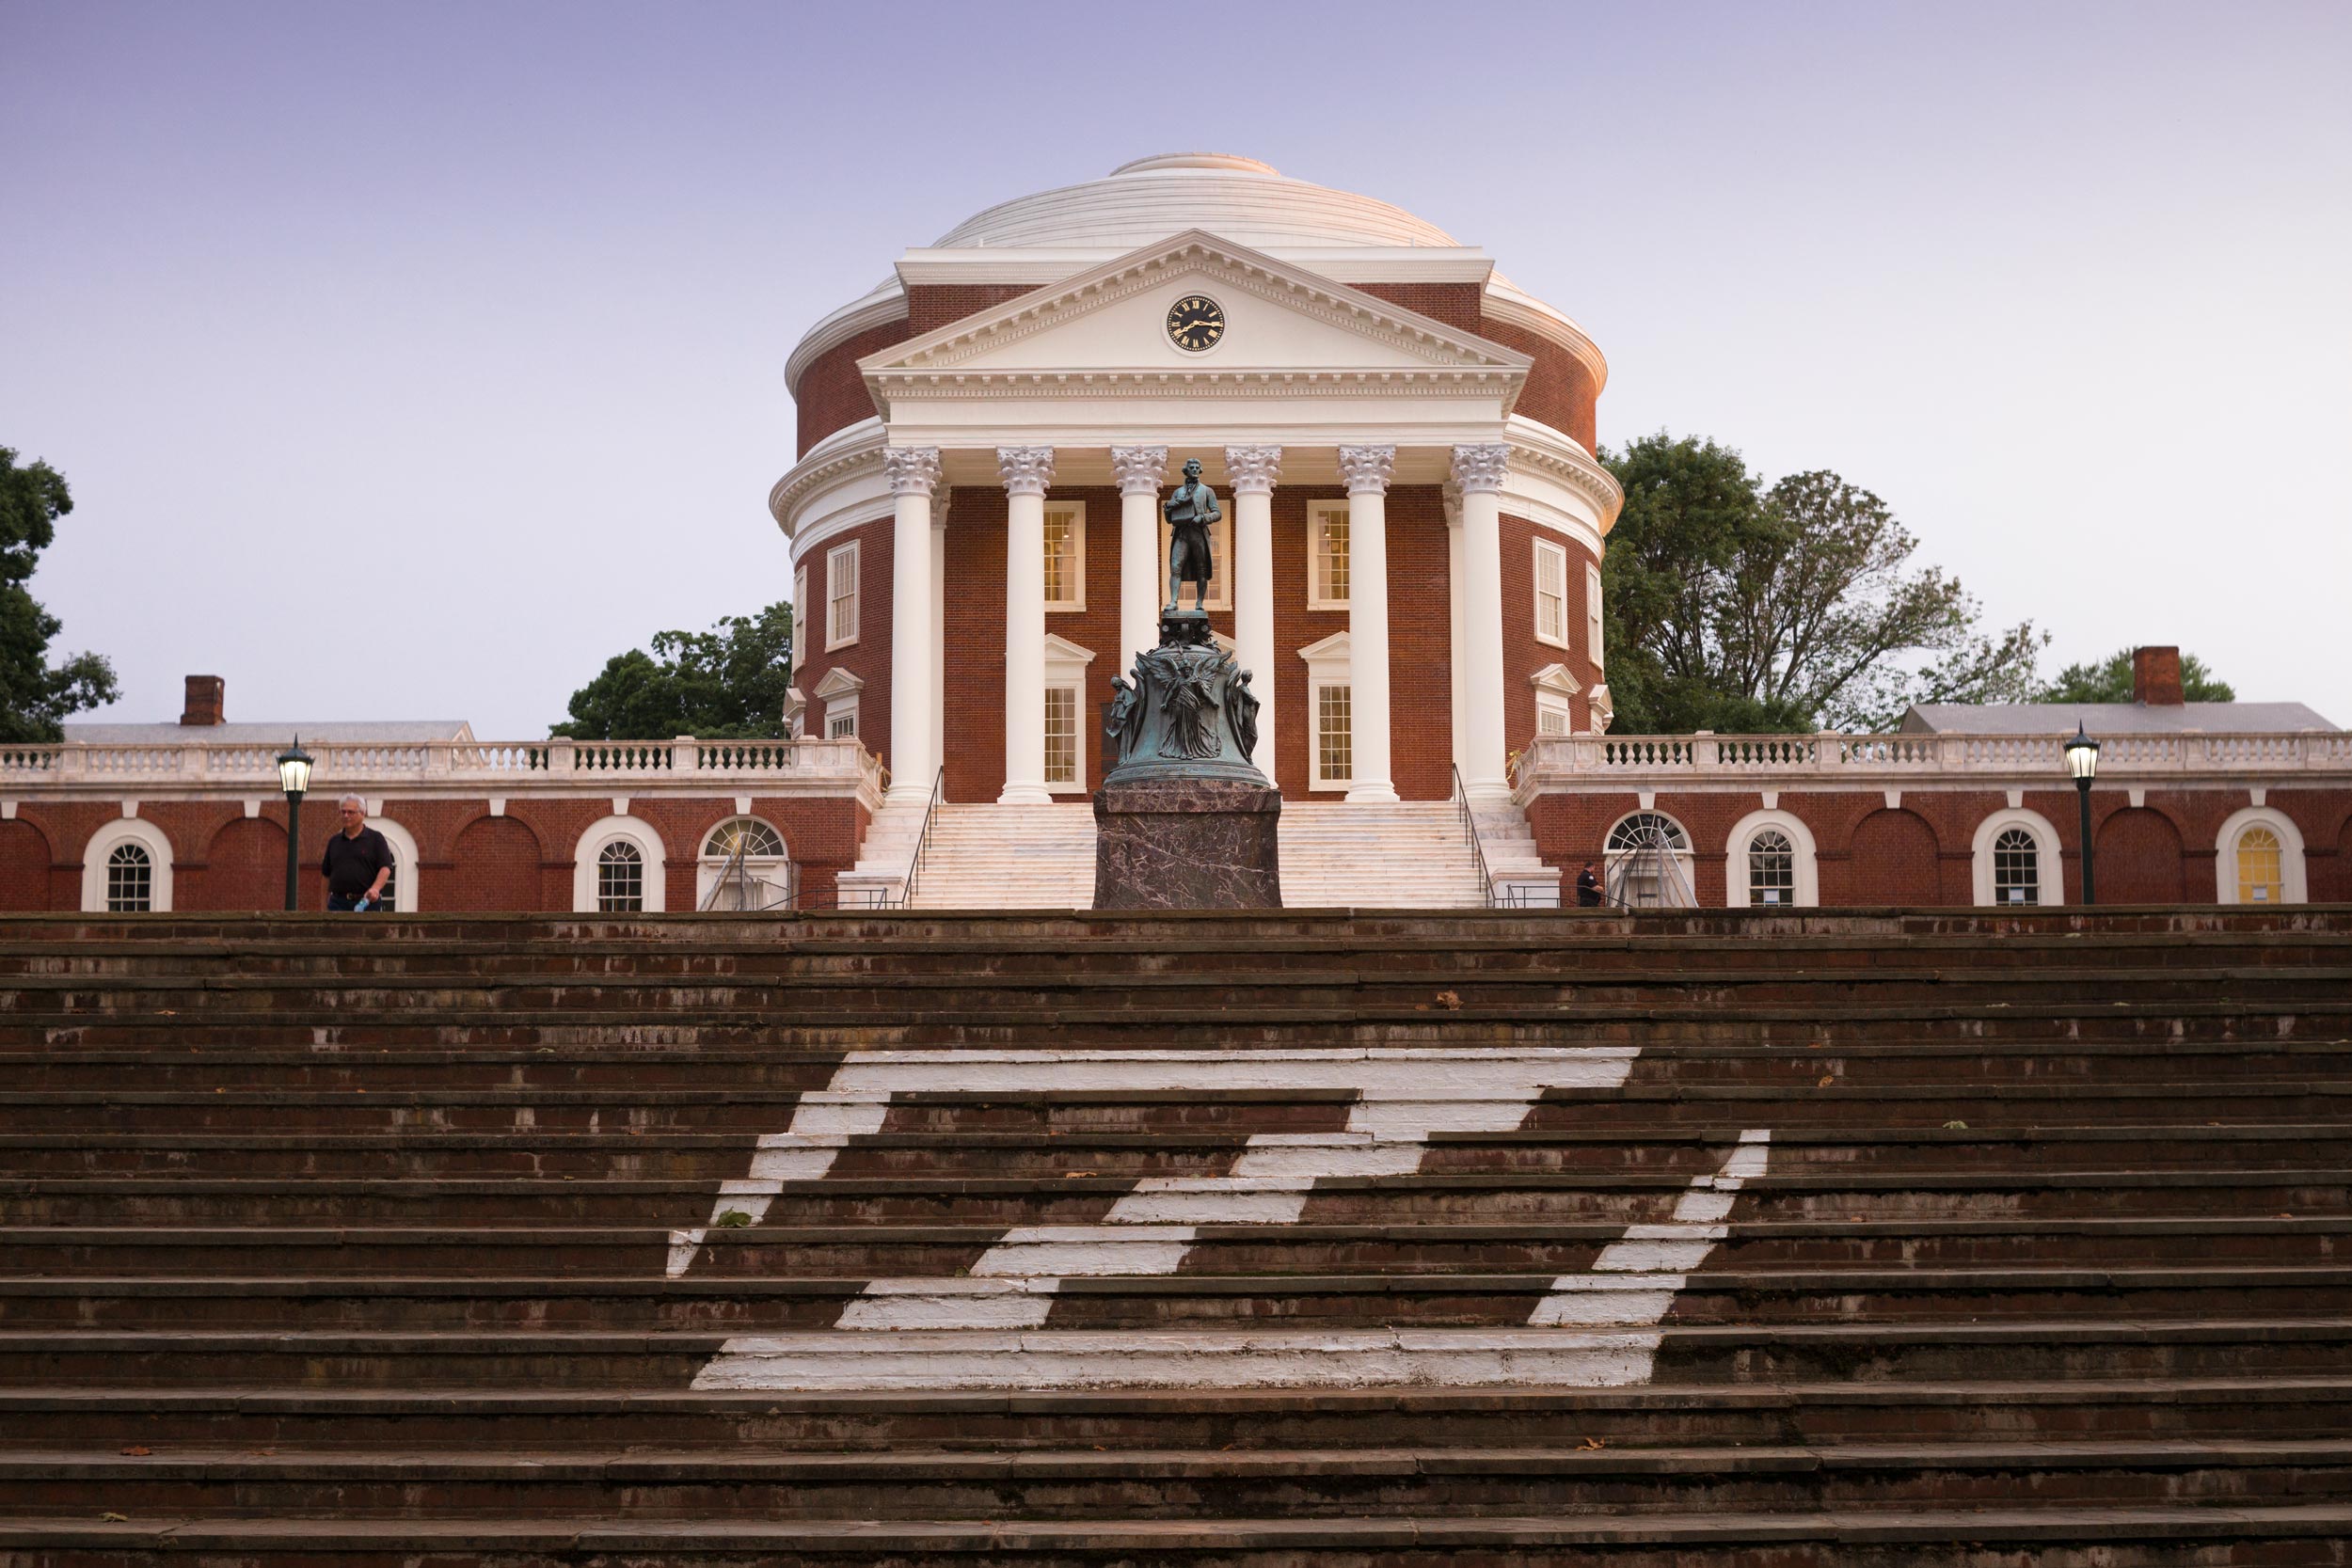 Thomas Jefferson Stature standing in front of the Rotunda with a Z on the steps